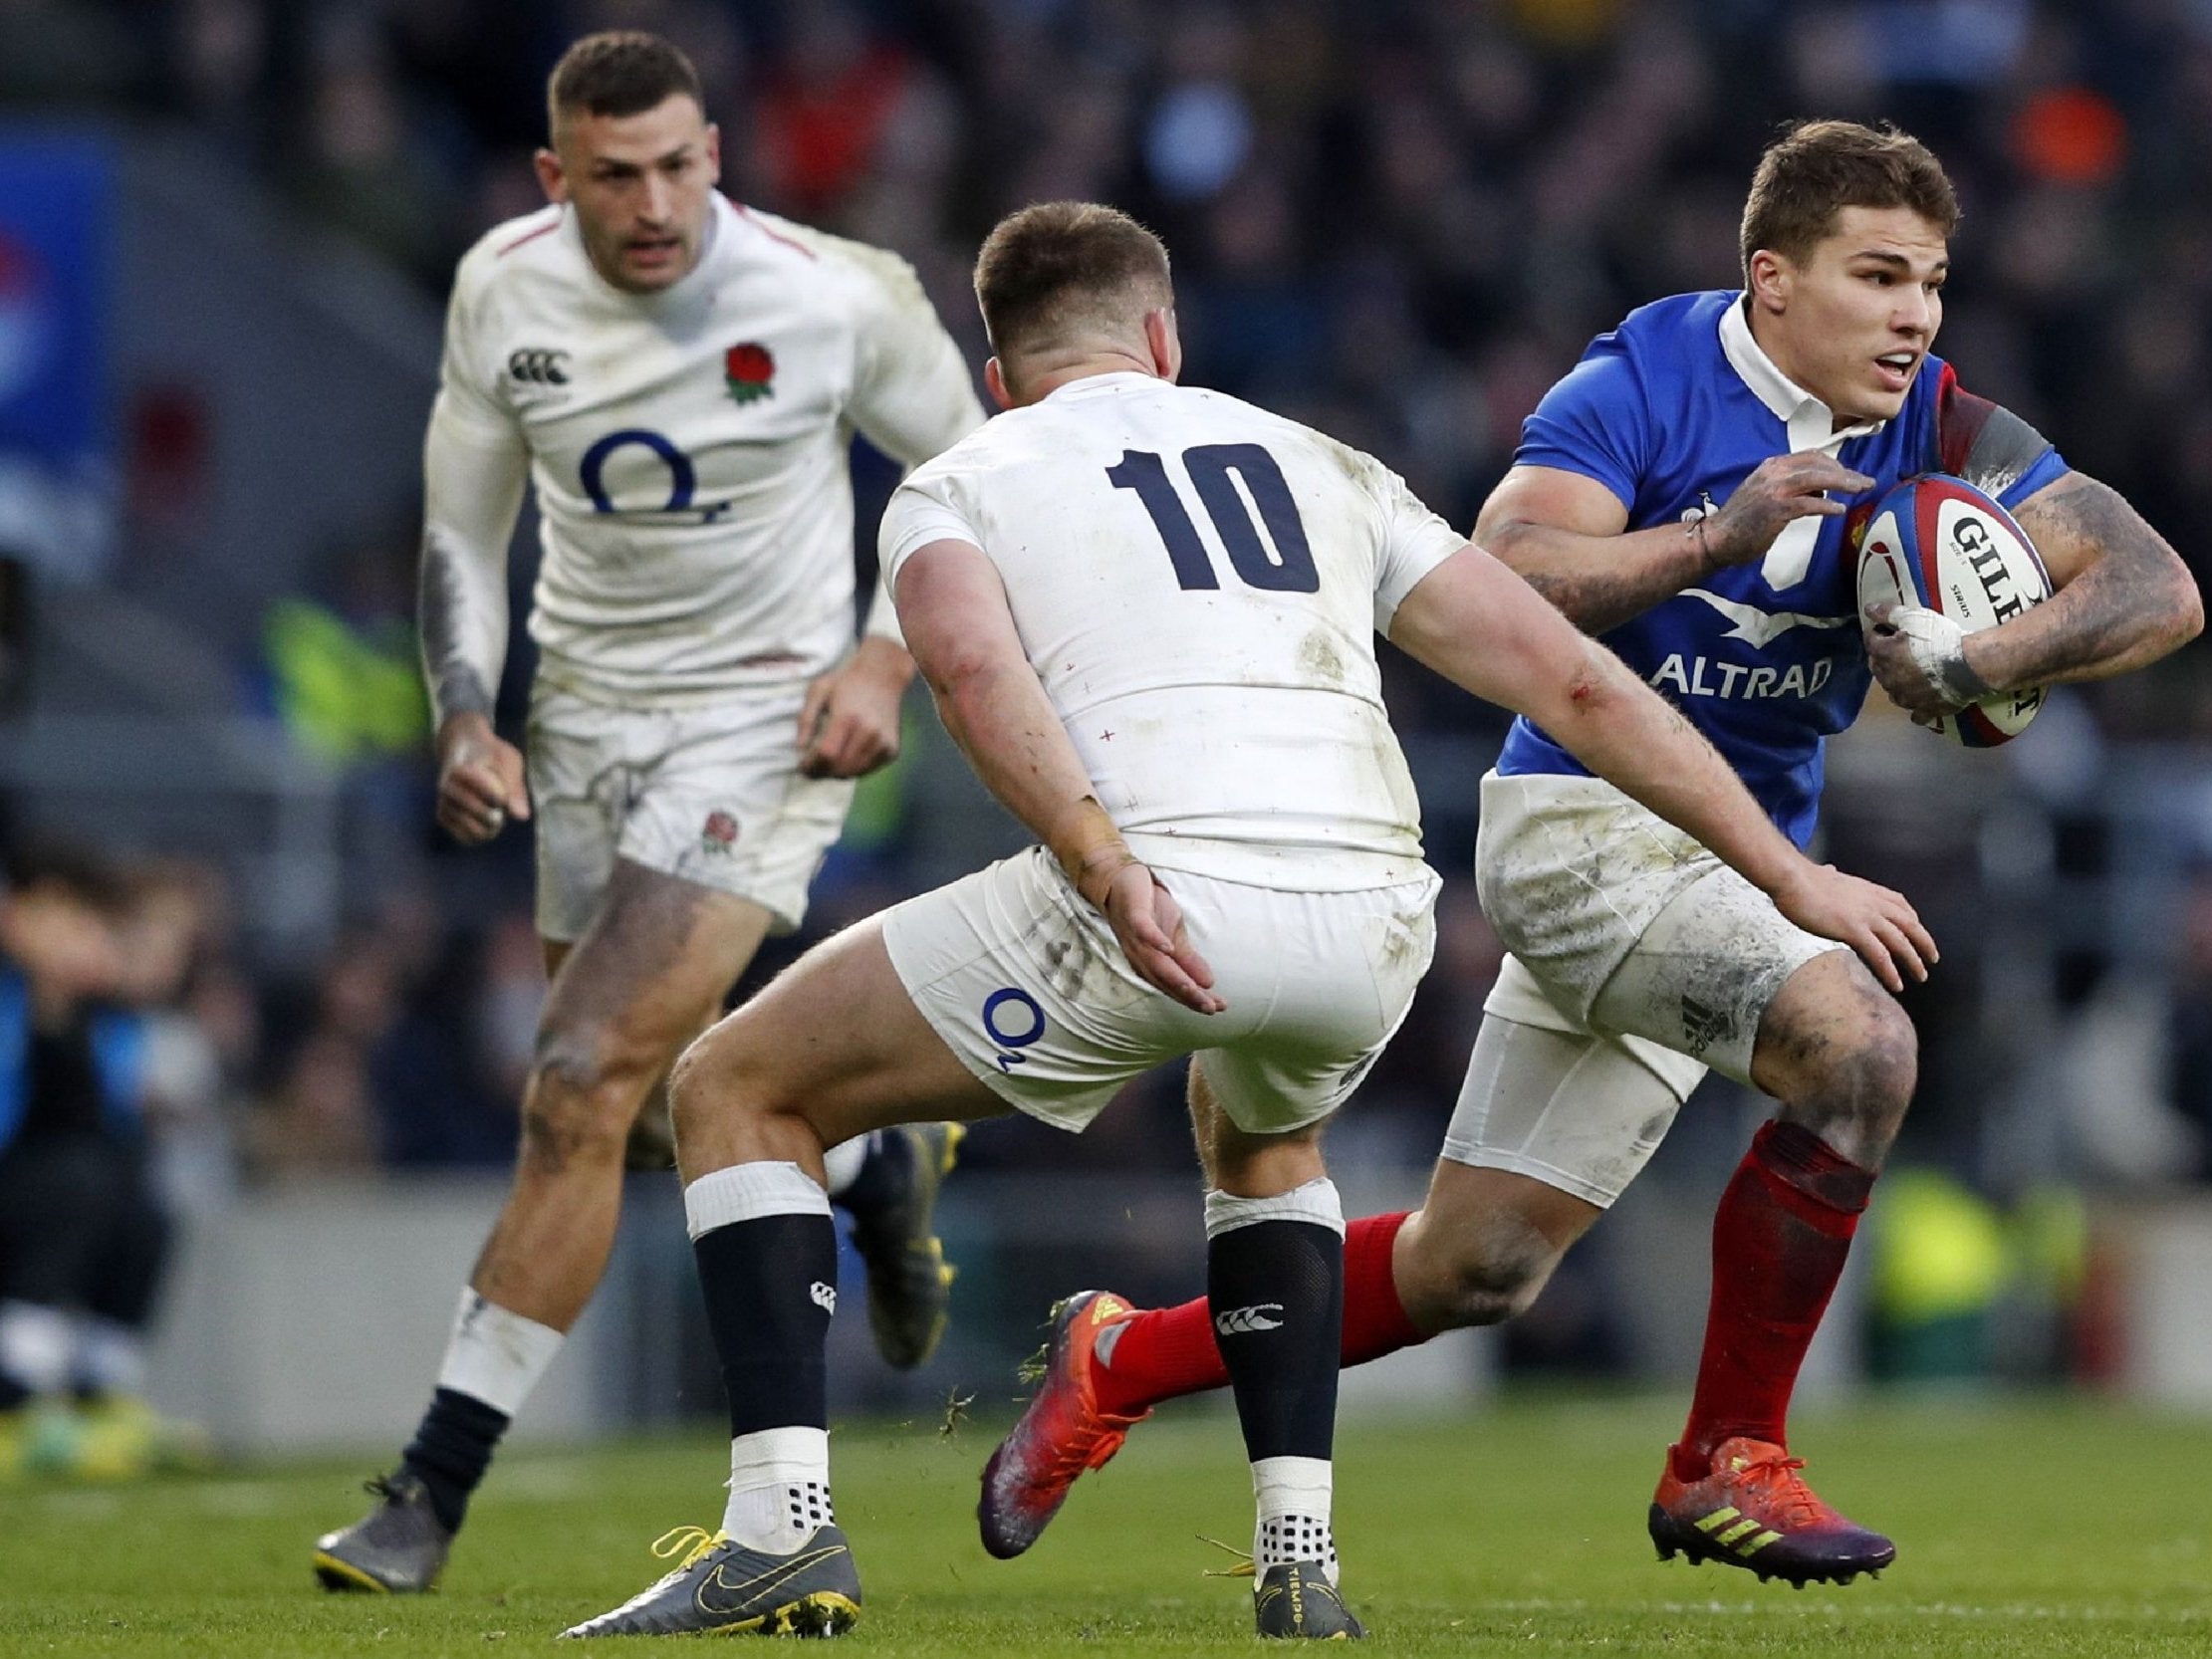 Antoine Dupont makes his first Six Nations start for France after impressing against England